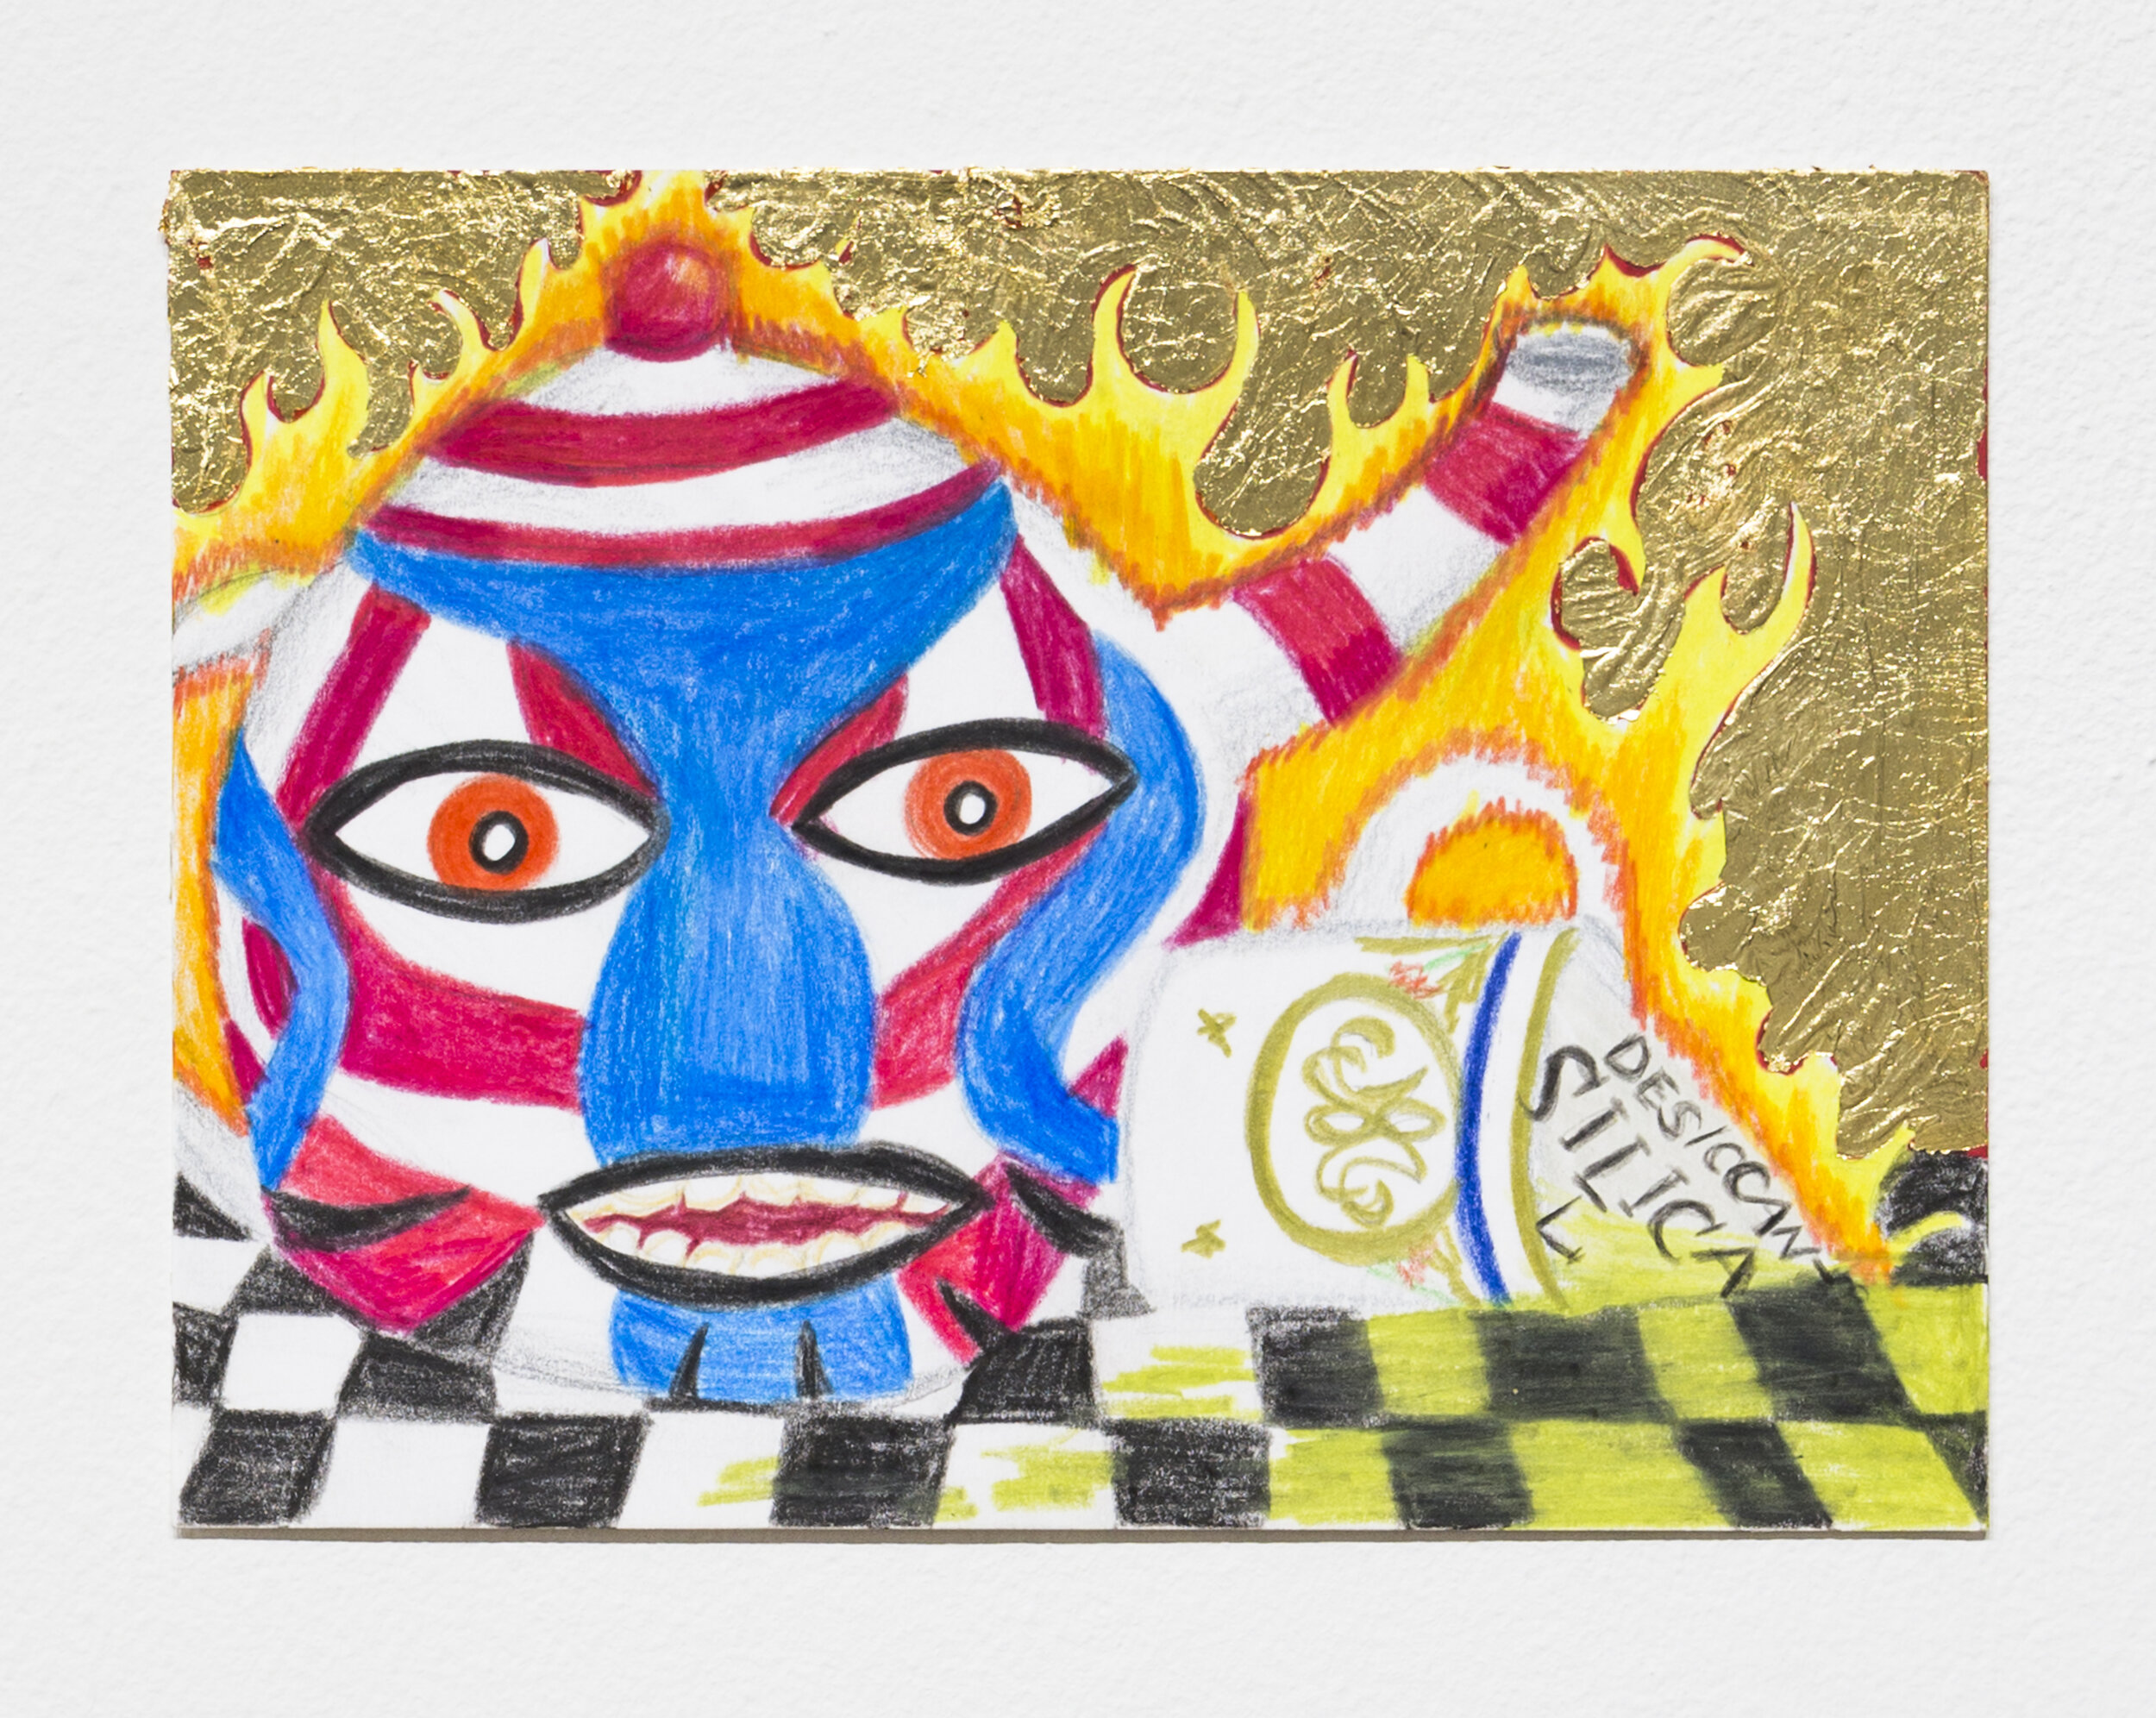   Burning Still Life #2 (The United States Champion Tea),  2018  6 x 8 inches (15.24 x 20.32 cm.)  Colored pencil and gold leaf on paper 